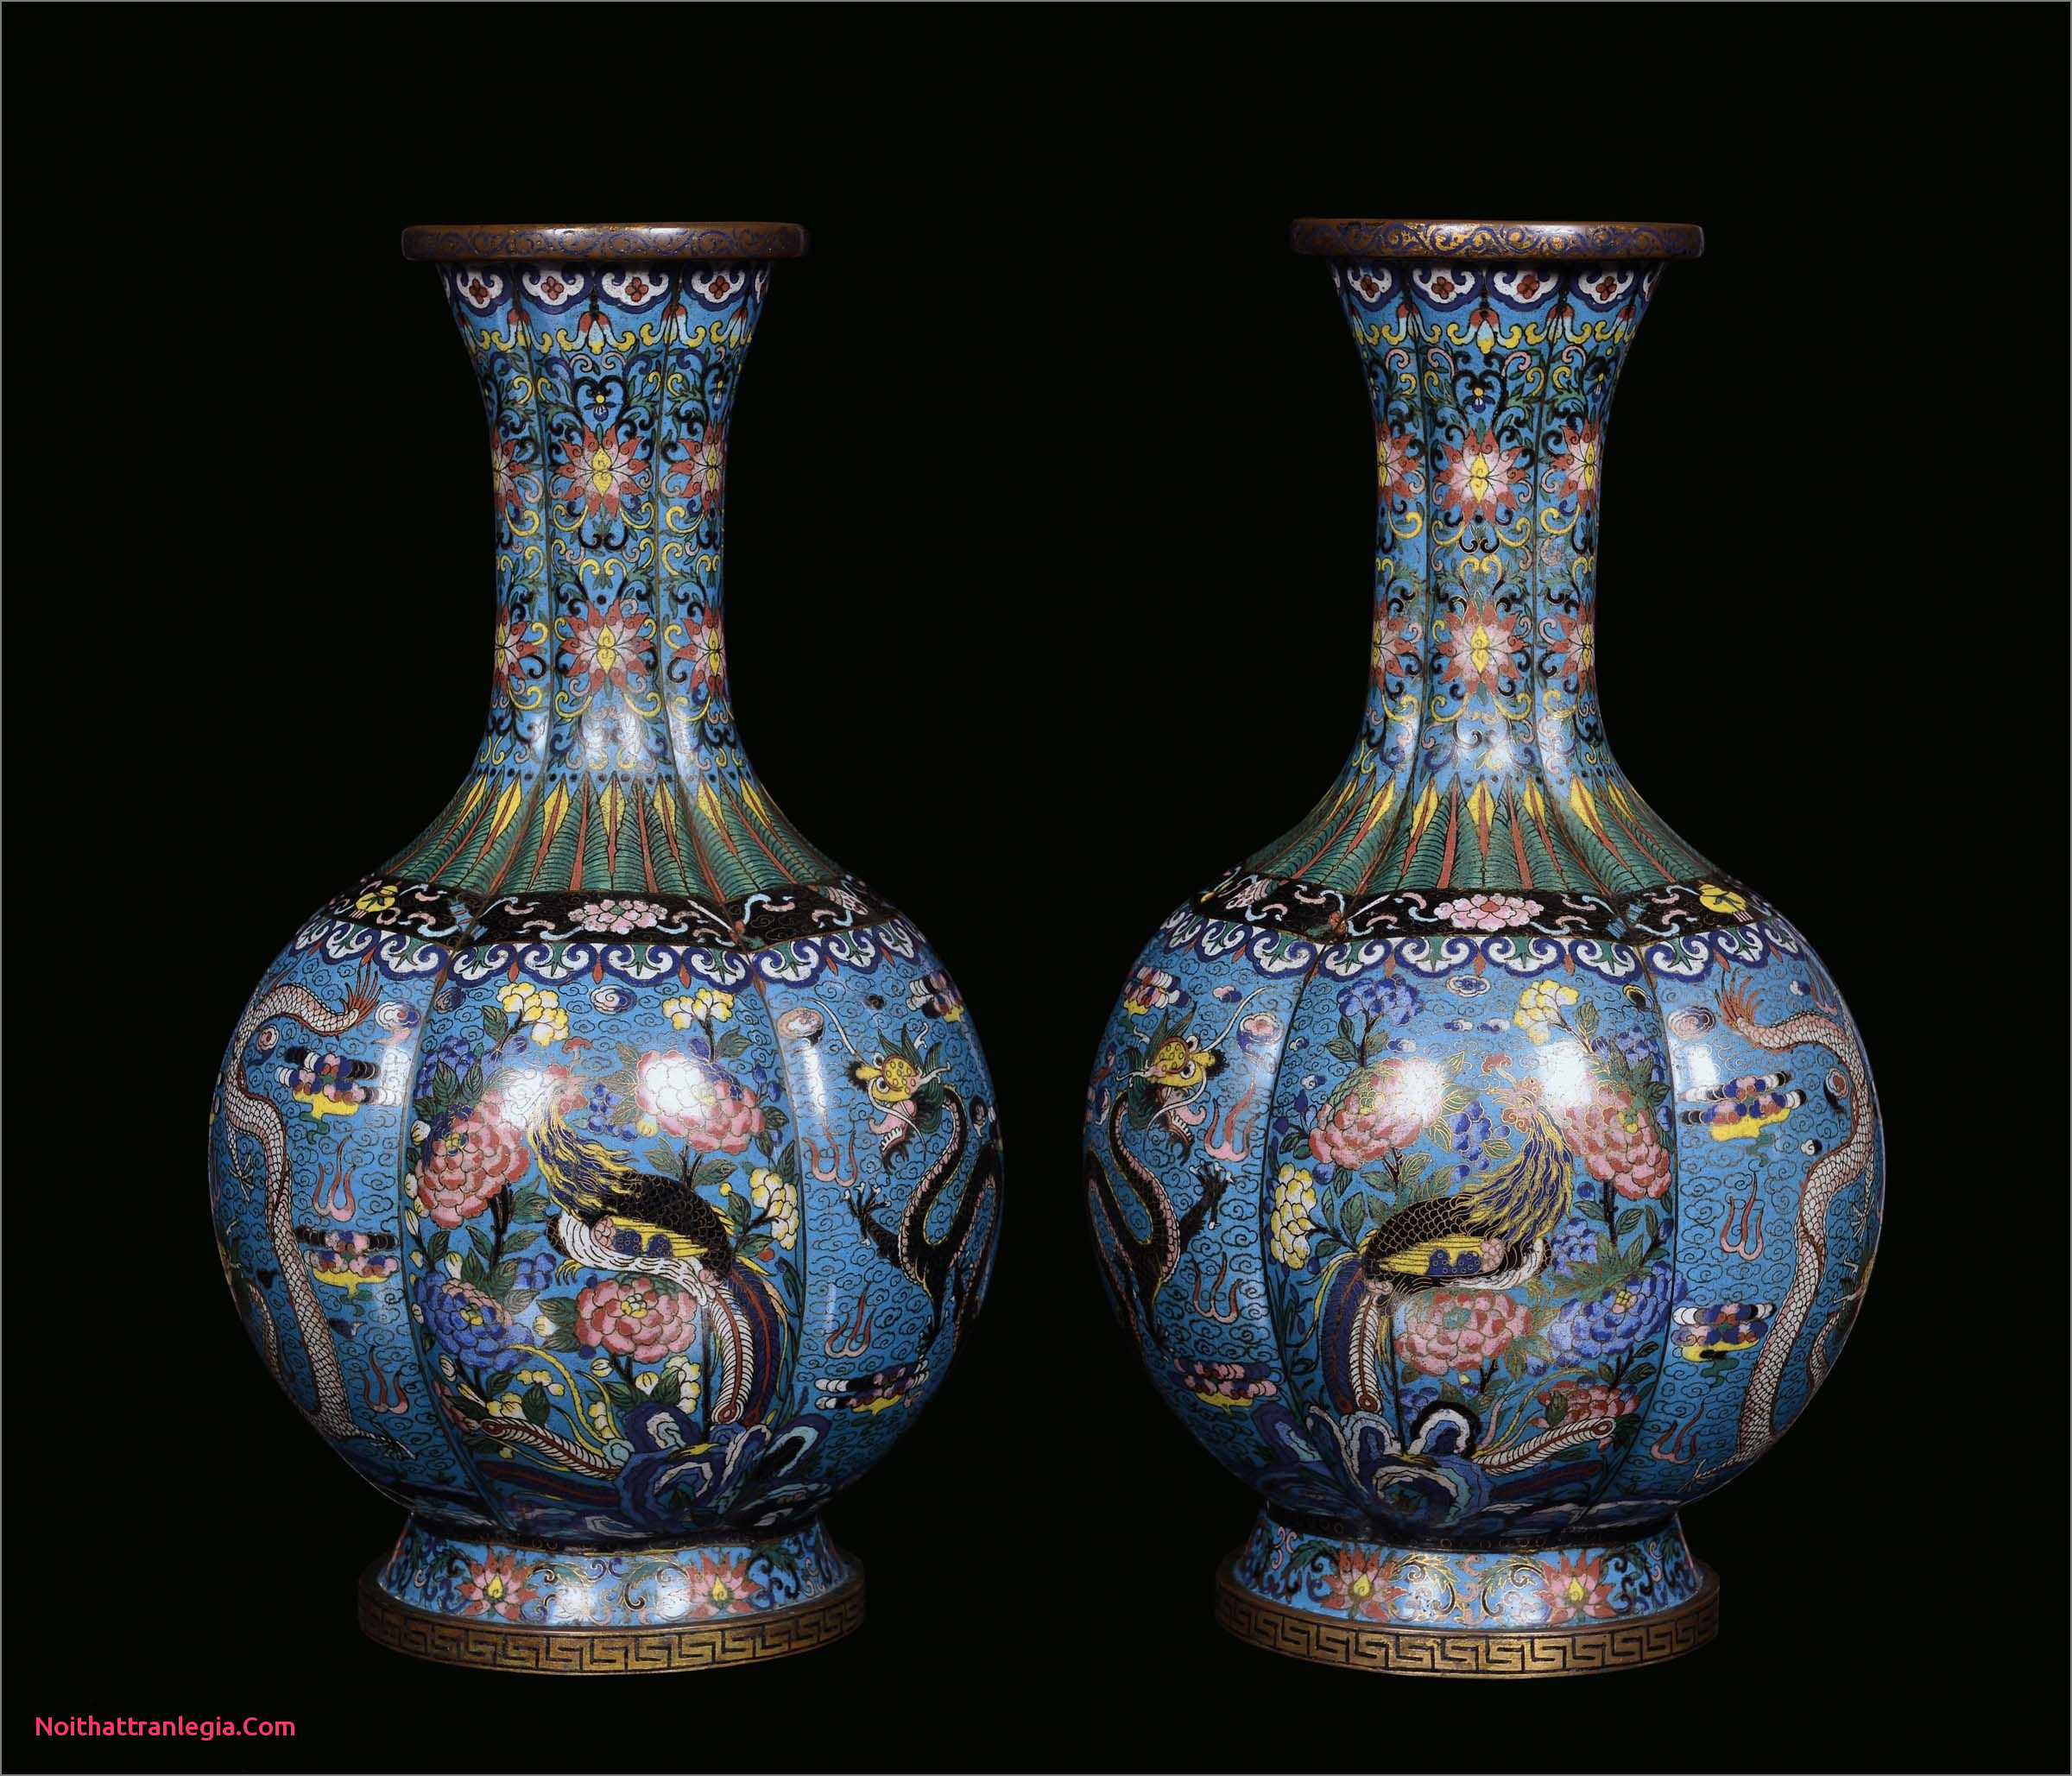 11 Stylish Large Antique Floor Vases 2024 free download large antique floor vases of 20 chinese antique vase noithattranlegia vases design with a pair of cloisonna vases with naturalistic decoration china qing dynasty guangxu period